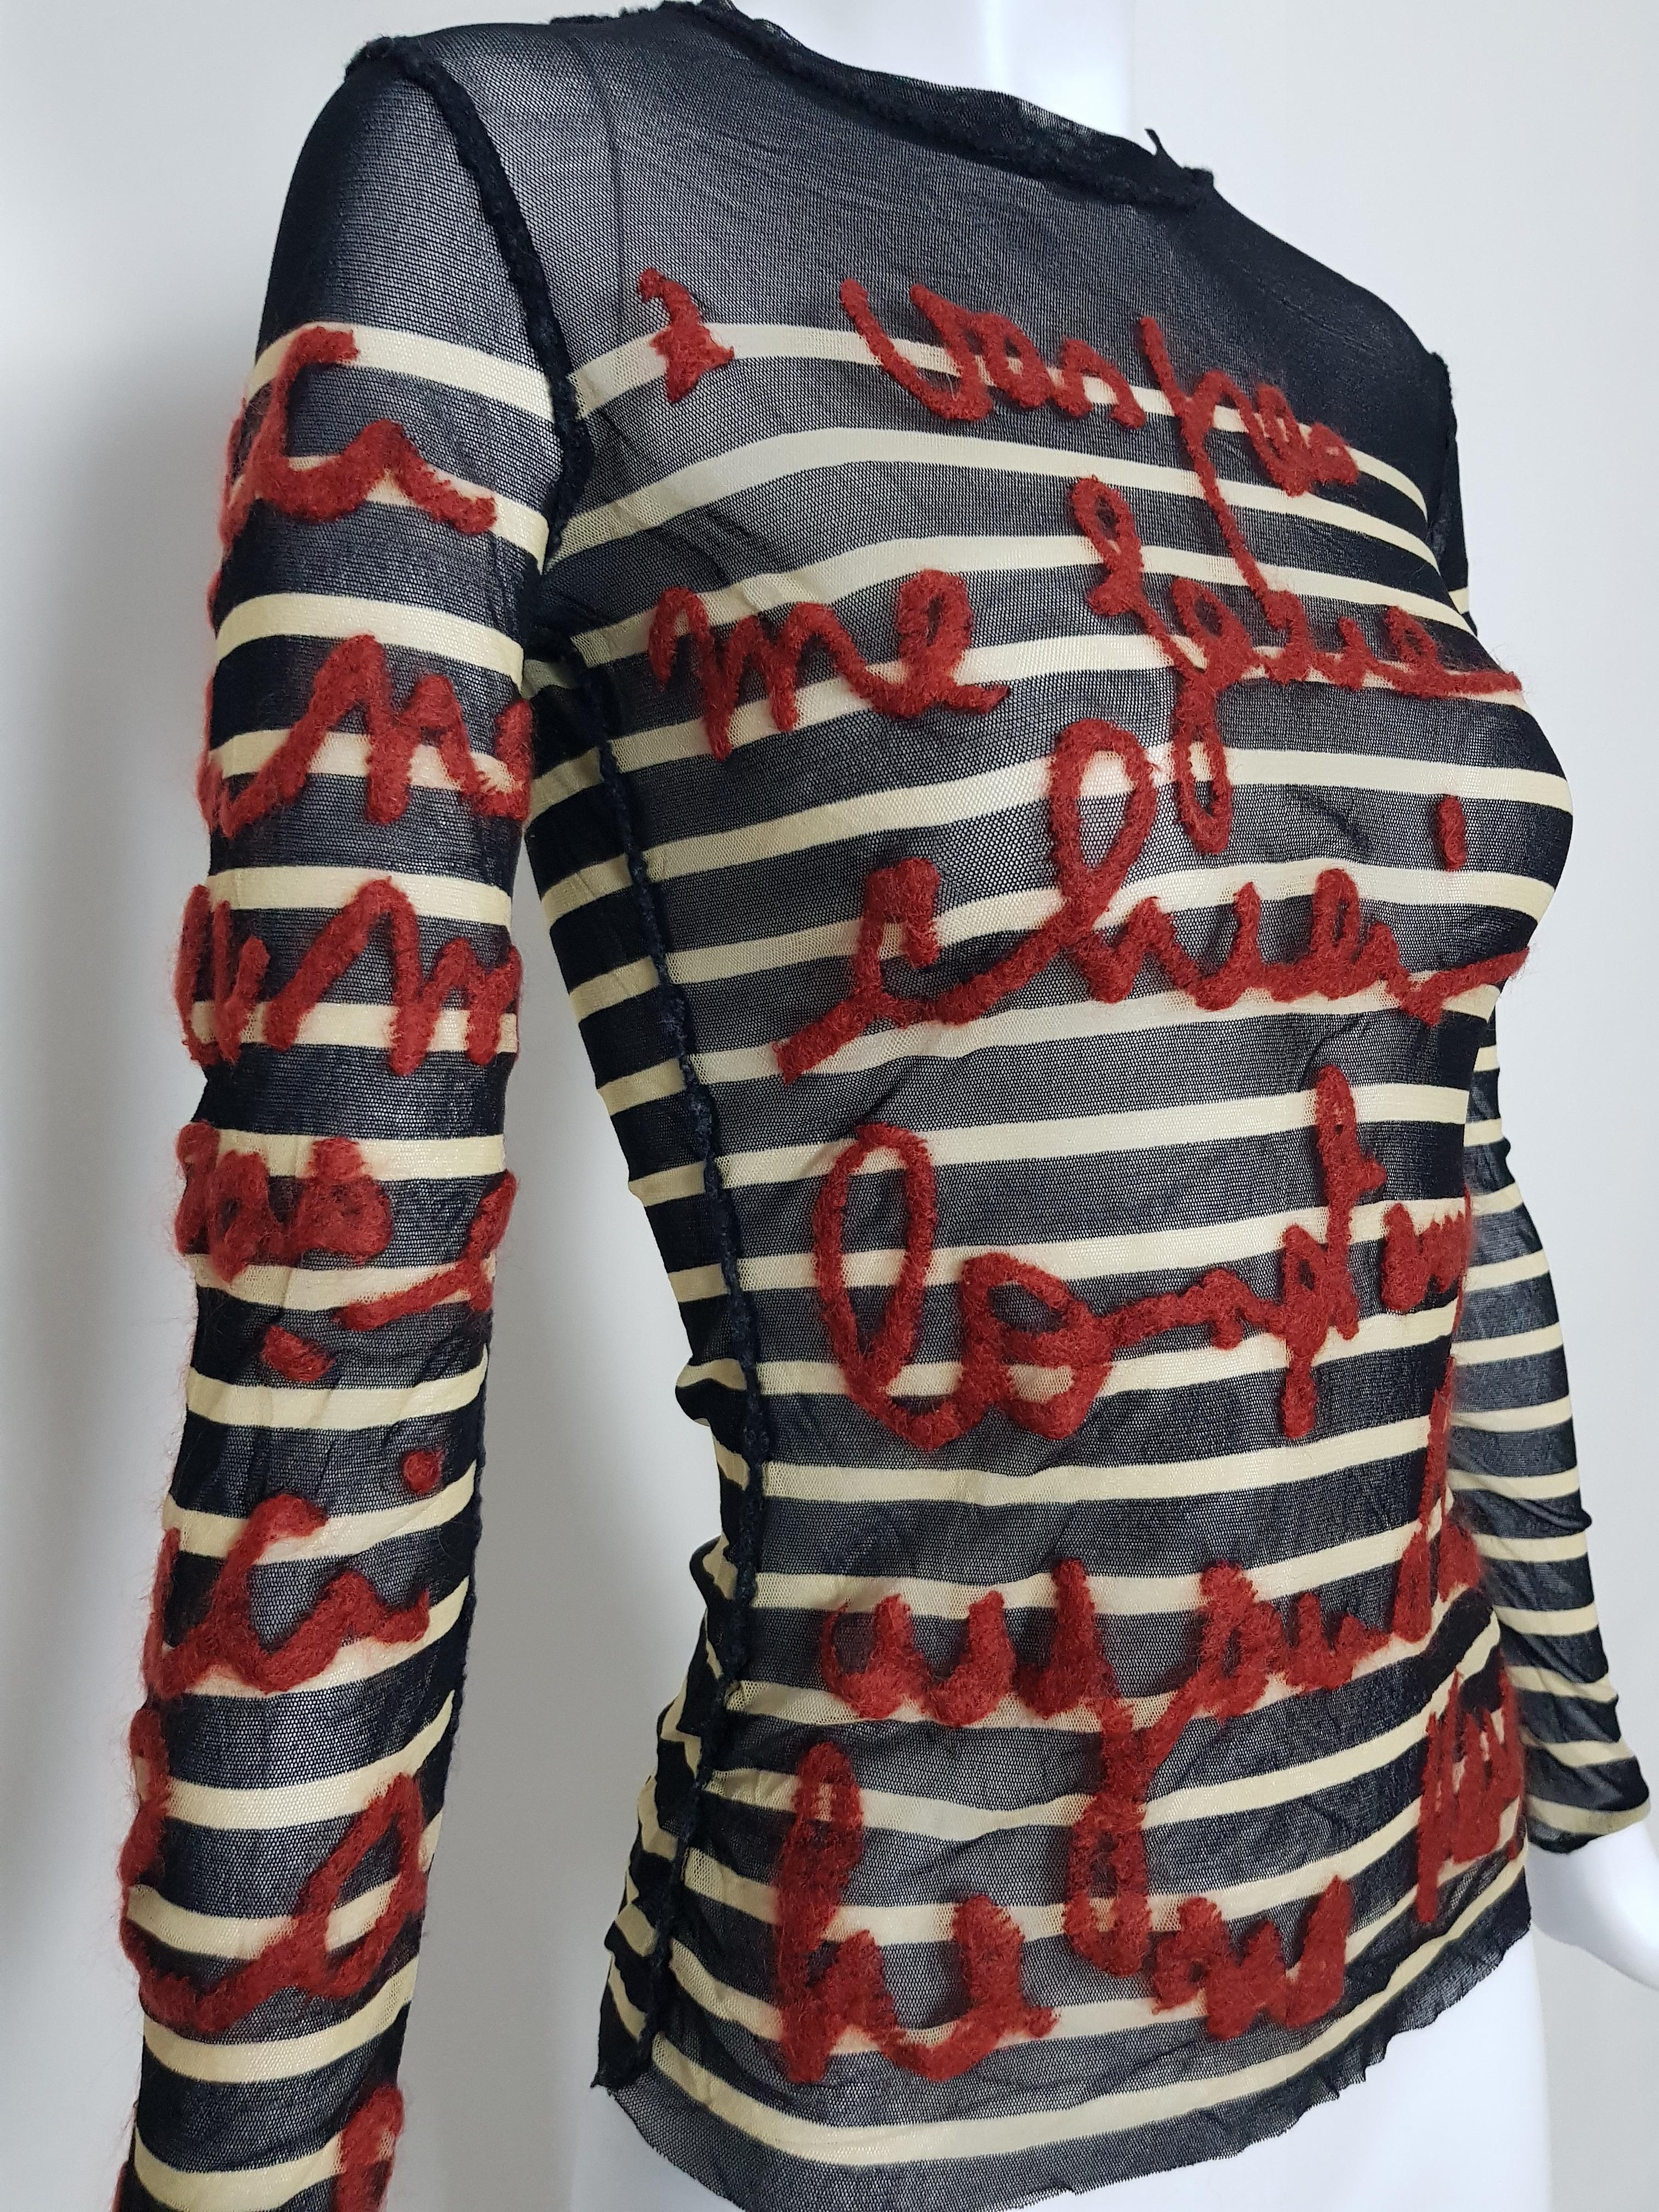 A wonderful and unique example of Jean Paul Gaultier's classic tattoo mesh sailor tops. 
The mesh has red wool French lettering stitched creating a look unique to it's self. 
No label, Gaultier's distinctive finishing.
Can fit S to M as fabric is